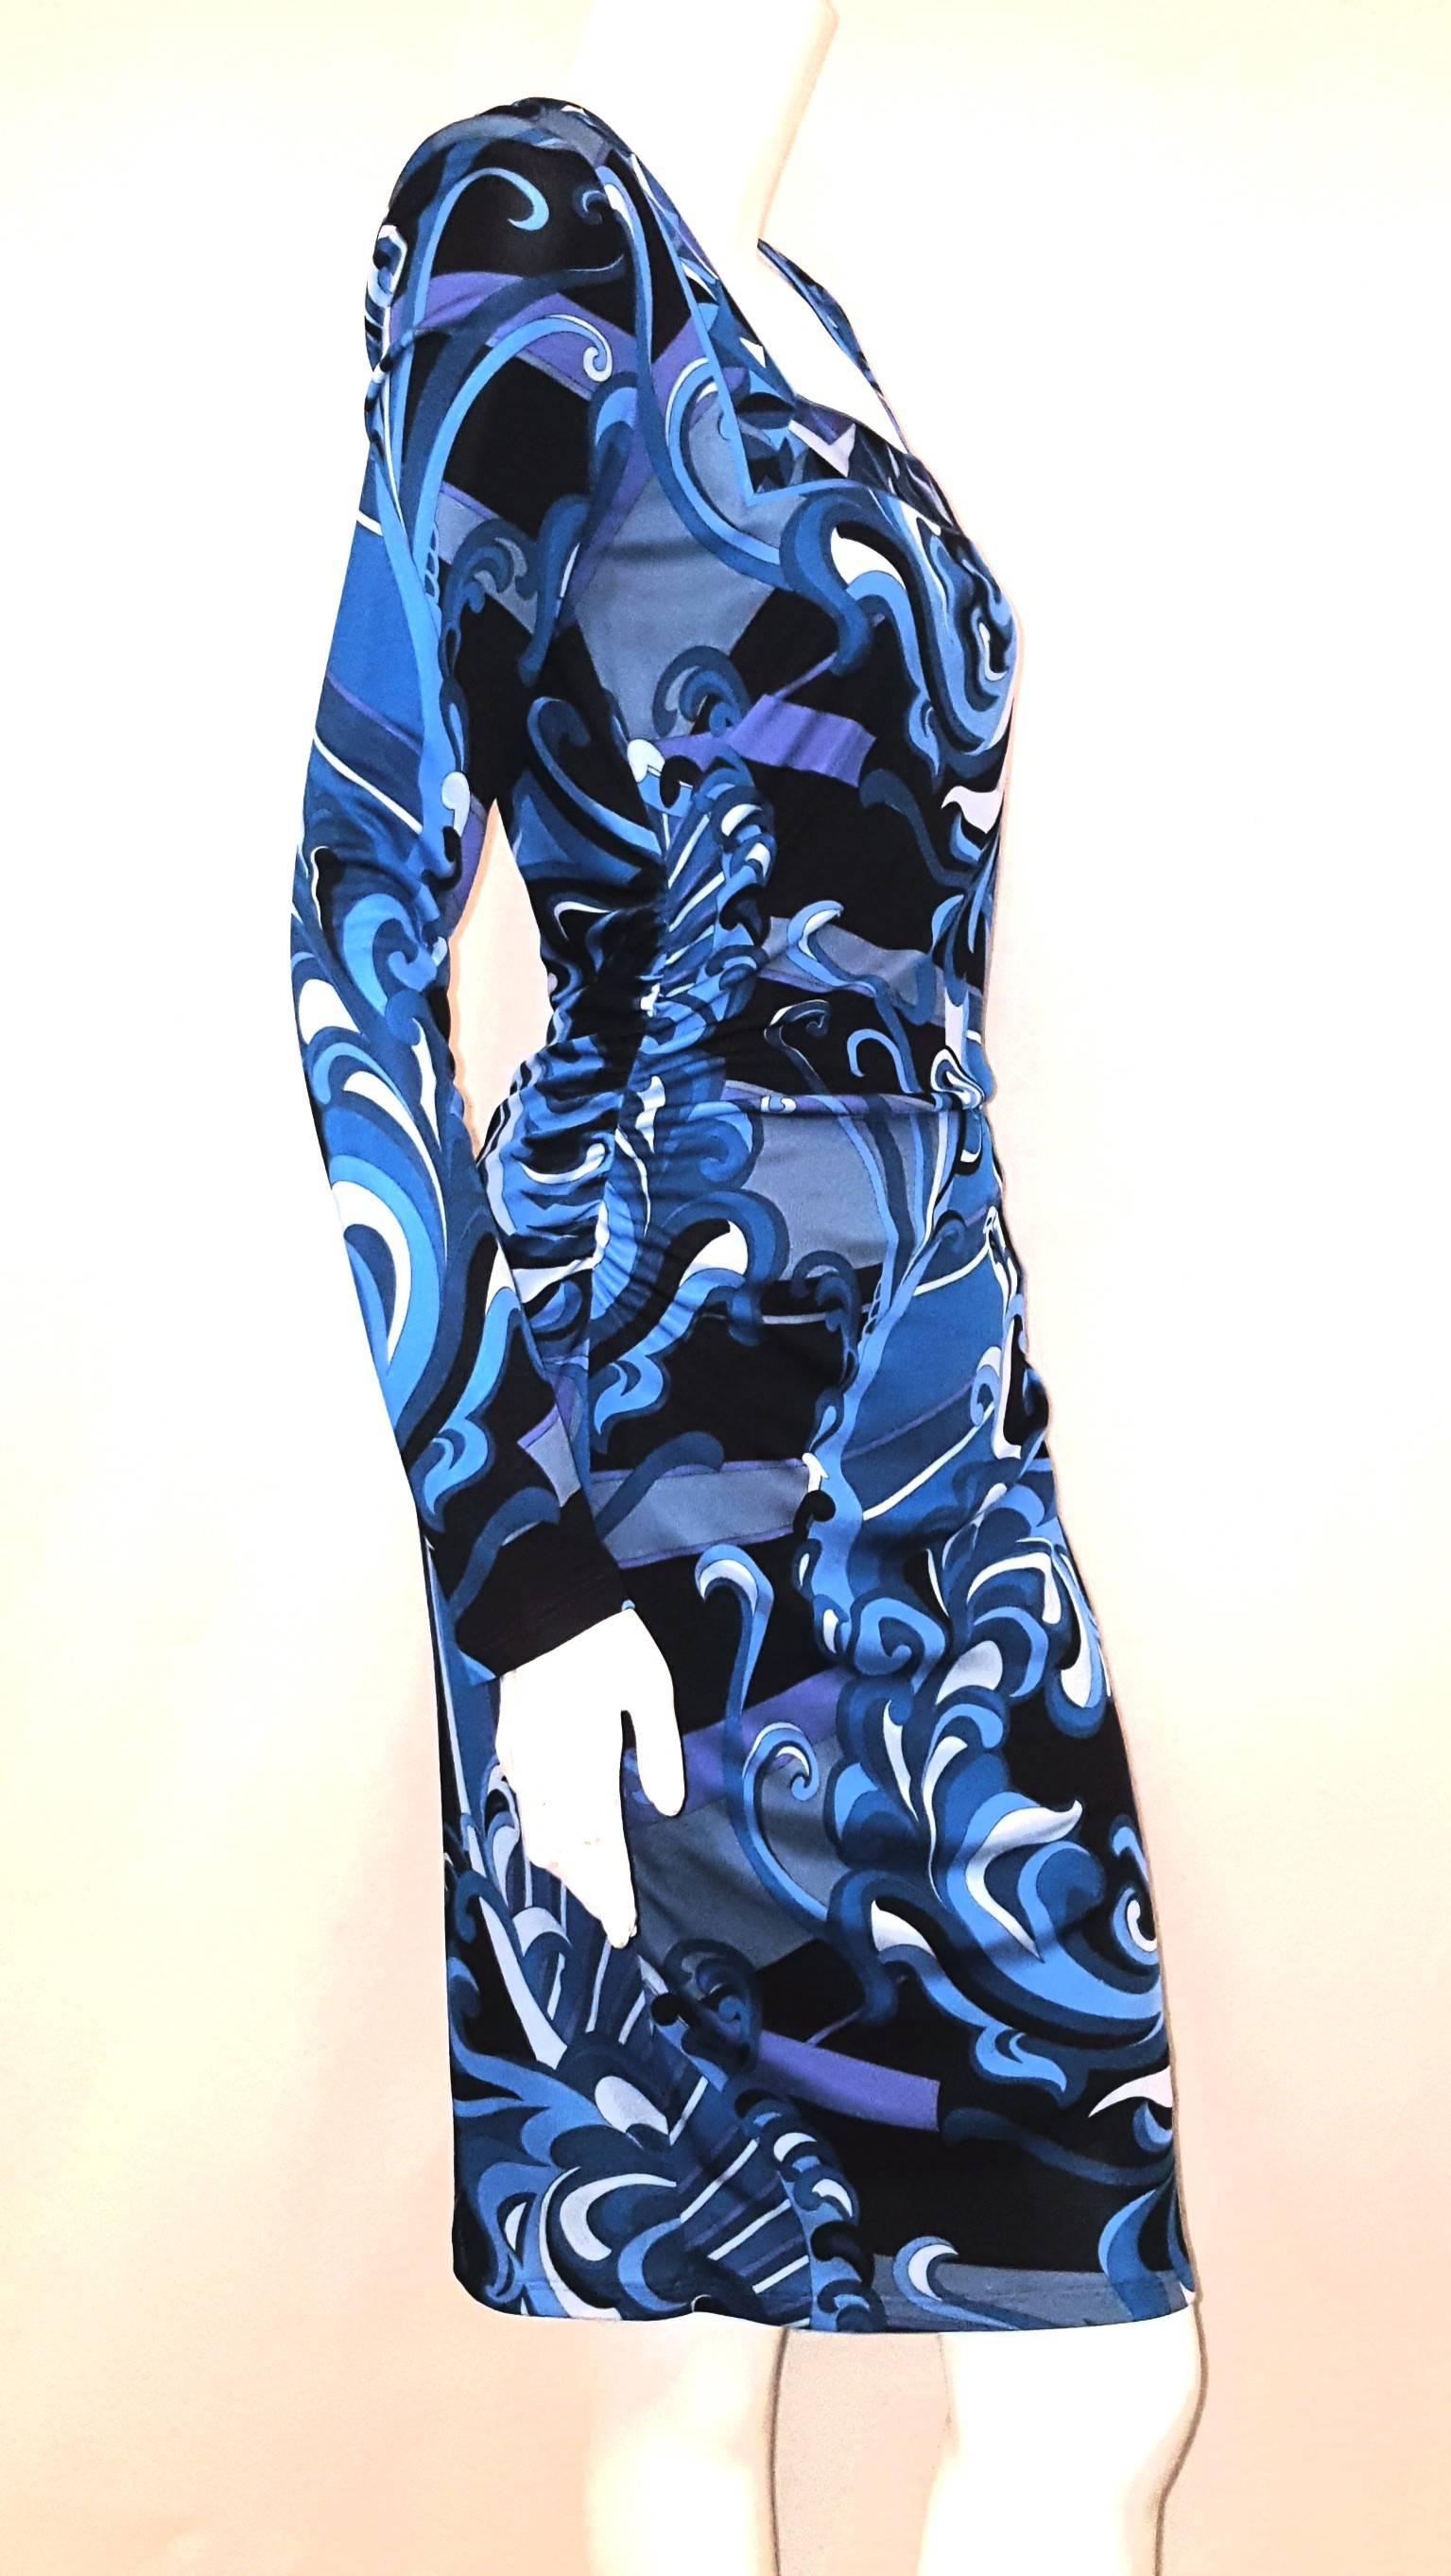 Emilio Pucci blue, turquoise, violet, grey and black abstract Pucci symbolic print dress with square neckline is such a wearable confection.
This stretch knit dress has ruching detail from the bust to the hip with hidden back zipper for closure. 